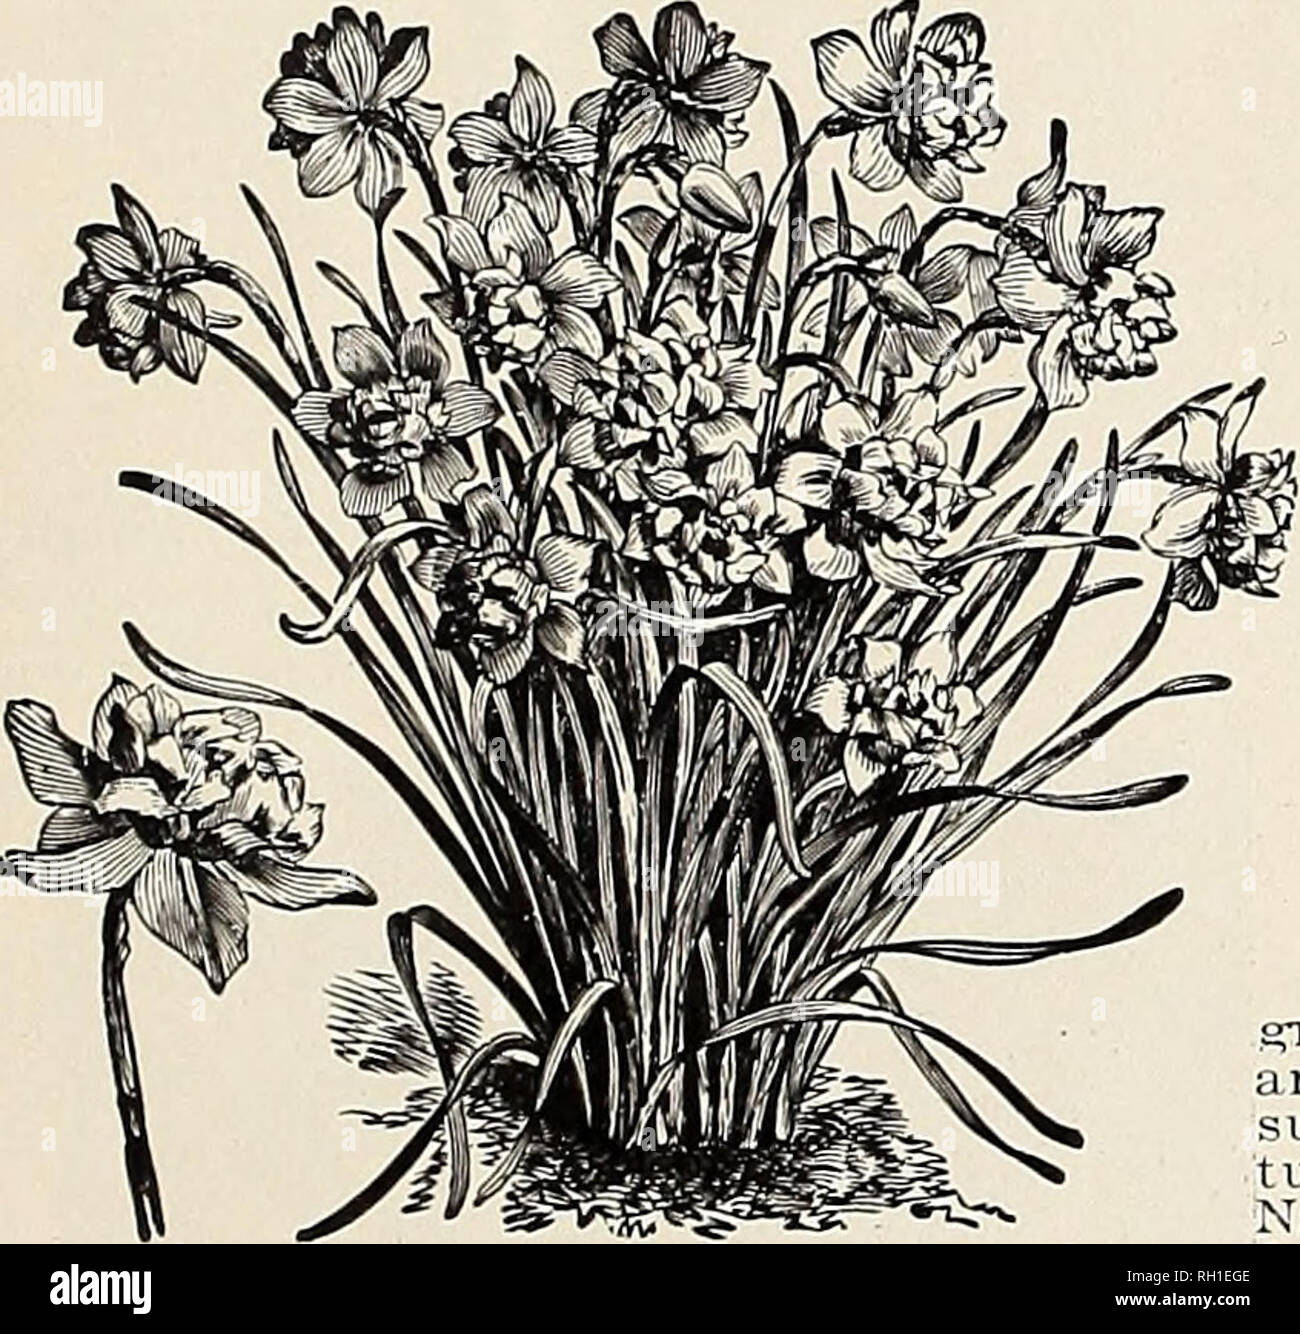 . Bulbs and plants : autumn 1907. Flowers Seeds Catalogs; Bulbs (Plants) Seeds Catalogs; Nurseries (Horticulture) Catalogs; Plants, Ornamental Catalogs. NARCISSUS PAPER WHITE GRANDIFLORA. DOUBLE NARCISSUS. Albus Plenus 0«loratus—Pure white, sw^eet scented, resem- bles a Gardenia Each Doz. 100 25 $165 Incomparable (Butter and Eggs)- scented Orange Phoenix—^White and orange -Sulphur yellow^. sweet DOUBLE VOJV SION—TRUE DUTCH. Extra Selected Large Bulbs—The finest of all double yellow Daffodils, used extensively for forcing as well as for bedding outdoors 3 Mammoth Double Nosed Bulbs—Selected bul Stock Photo